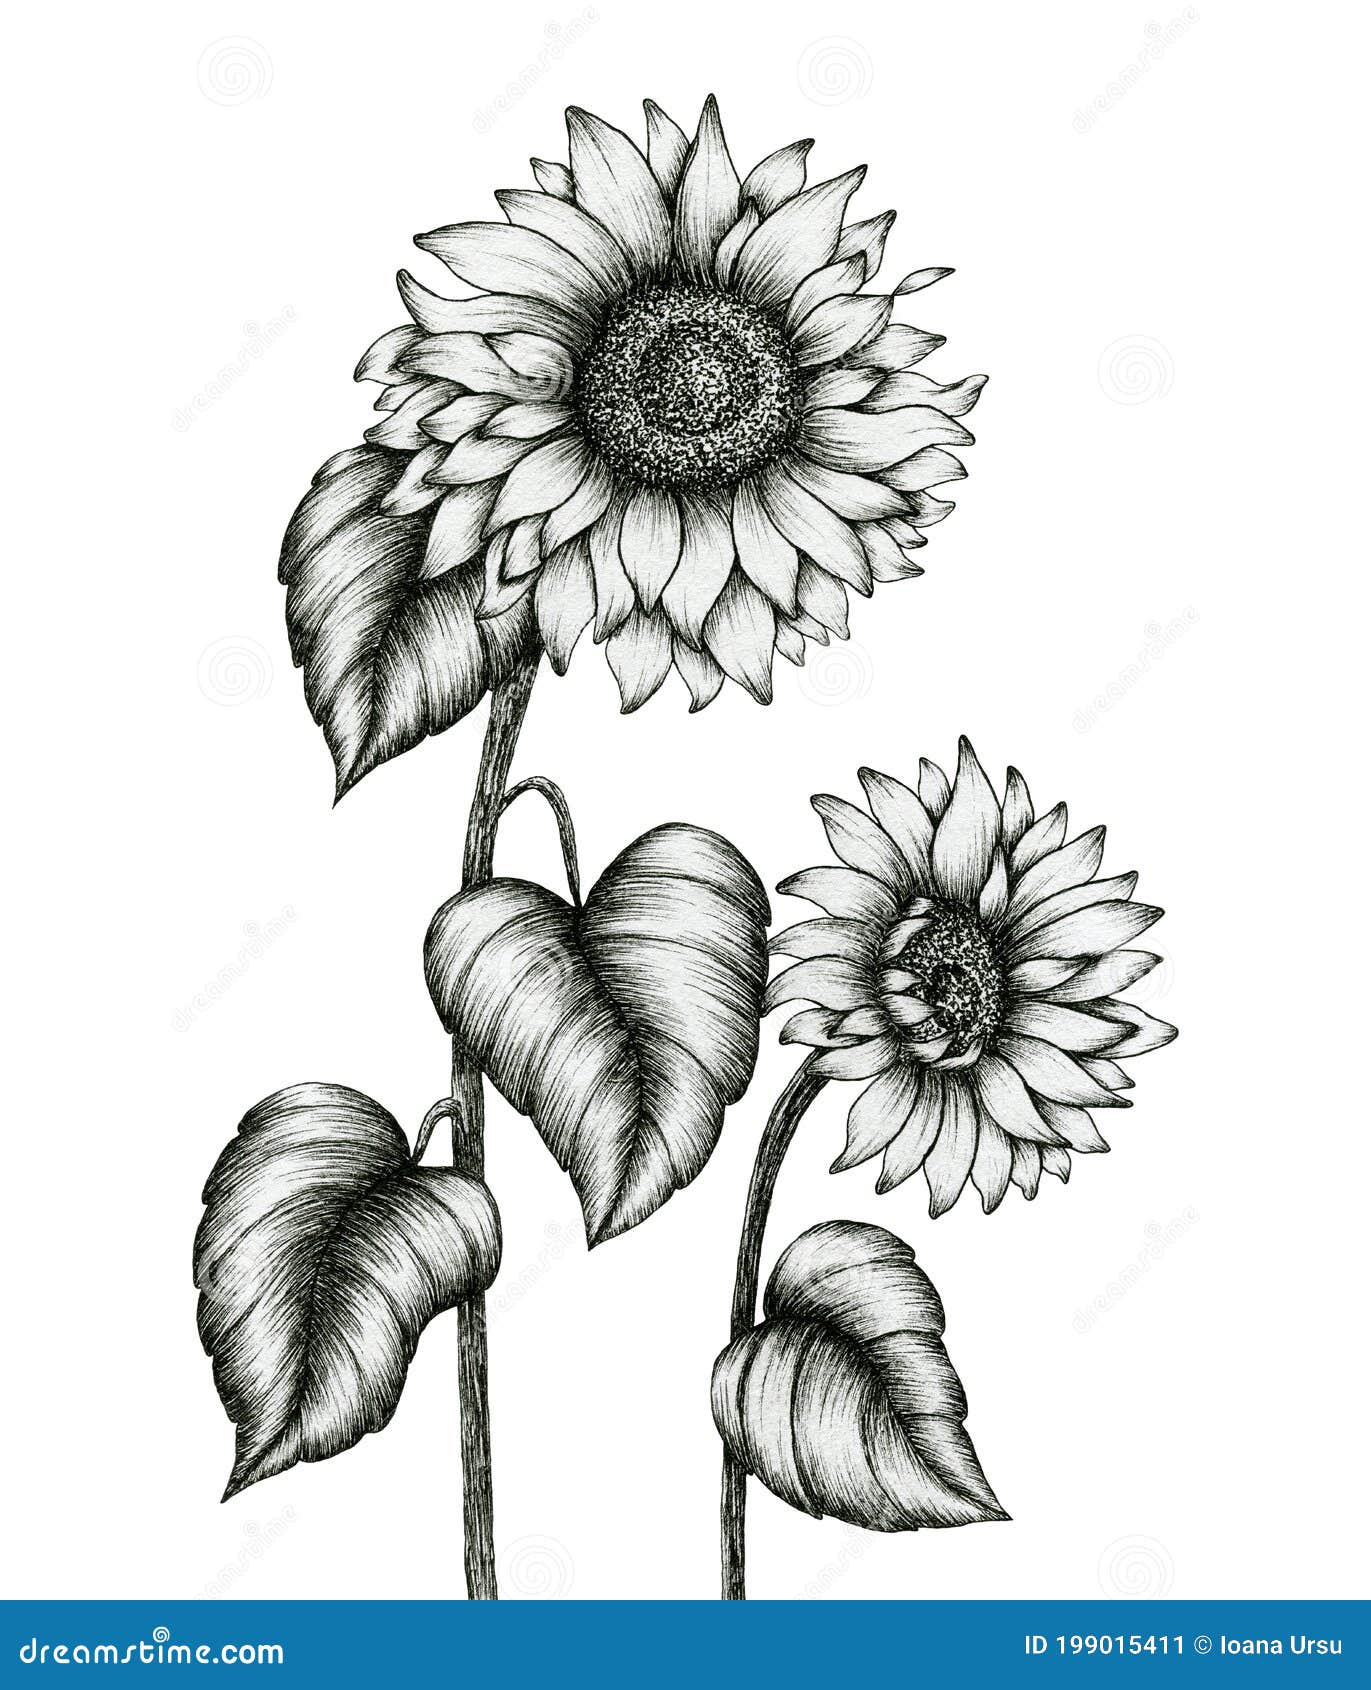 8,000+ Sunflower Sketch Pencil Pictures